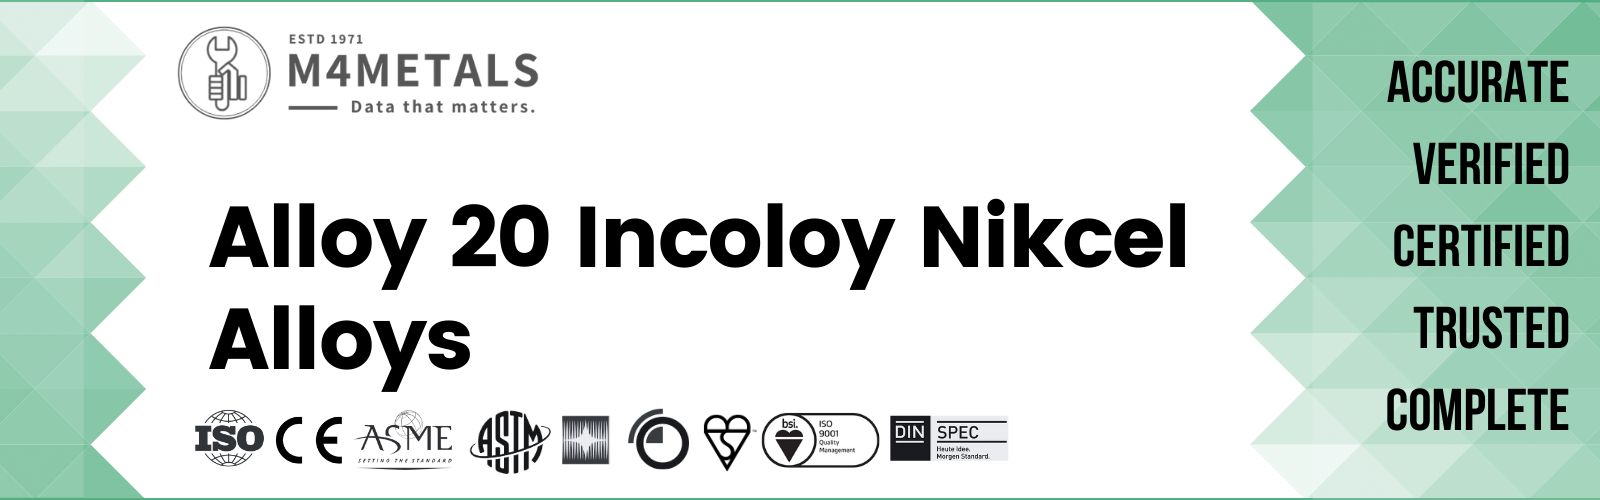 Incoloy Alloy 20